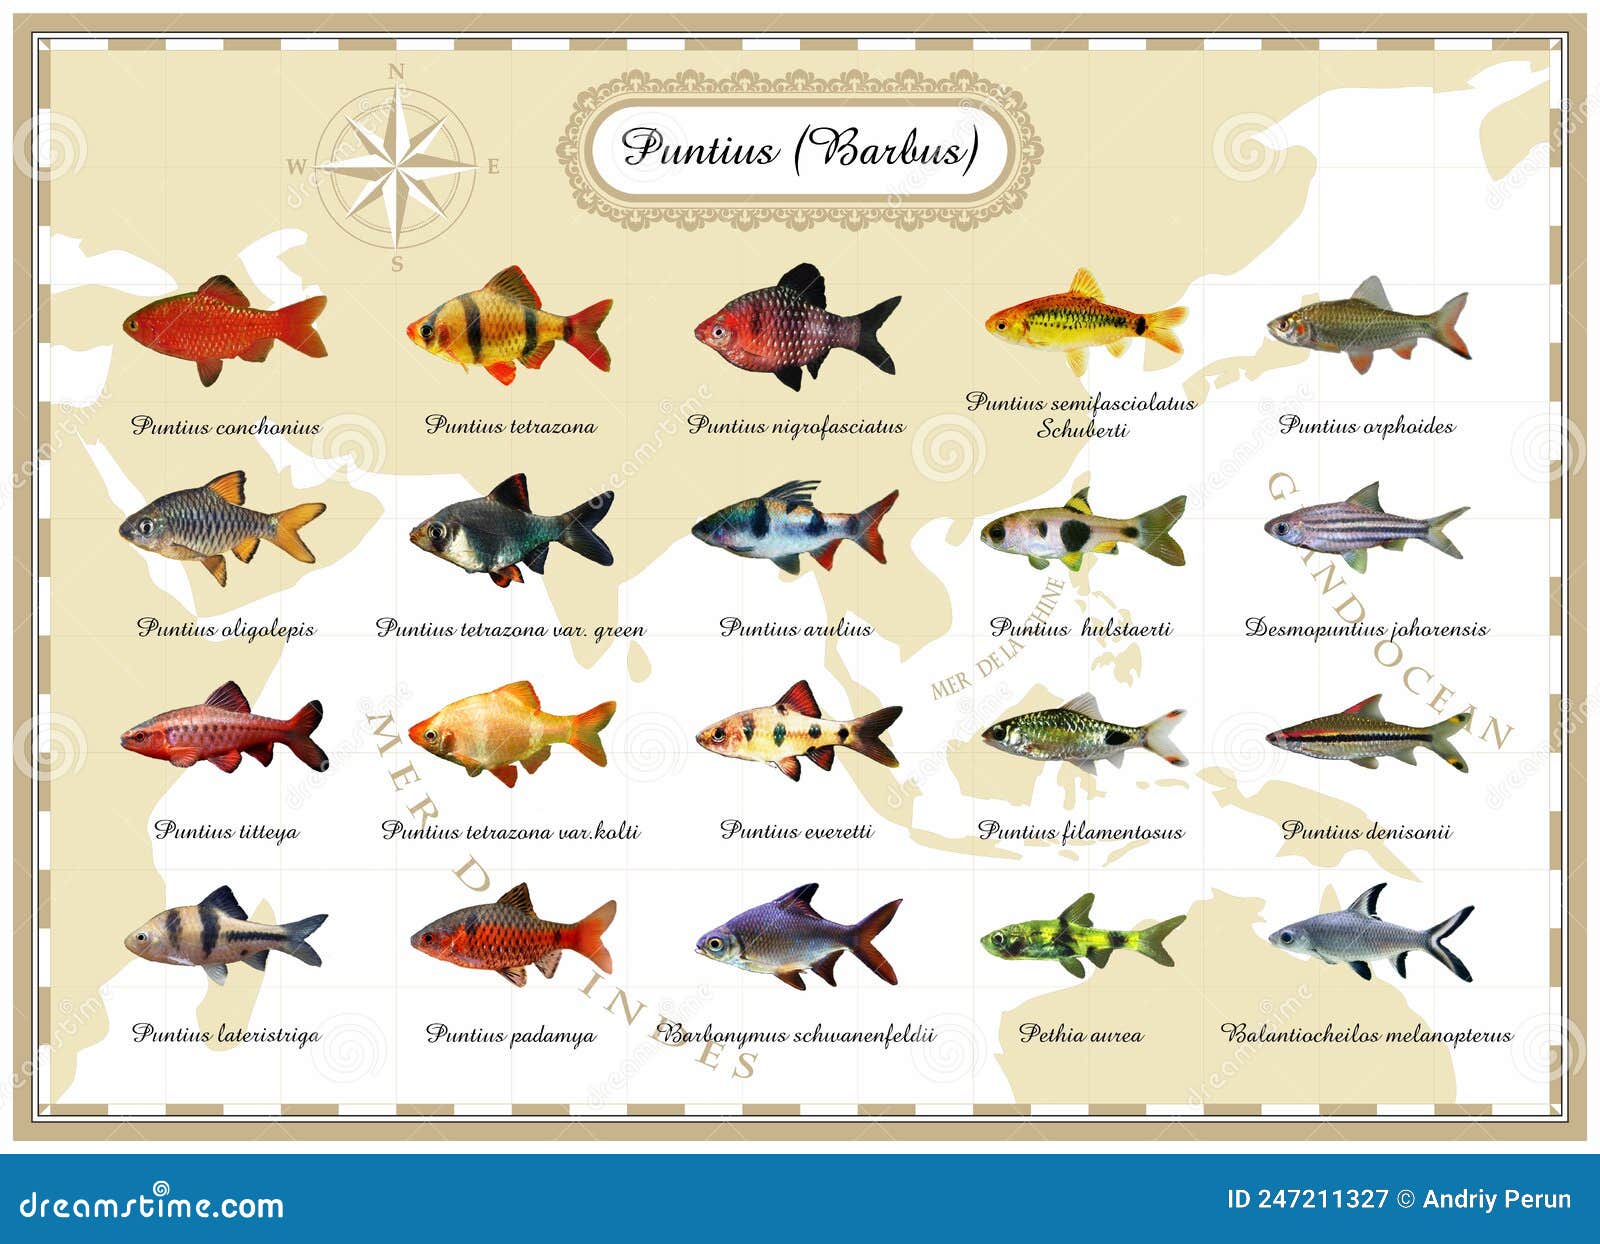 Ð¡ollection of Bright Fish from the Family Puntius Barbus Stock